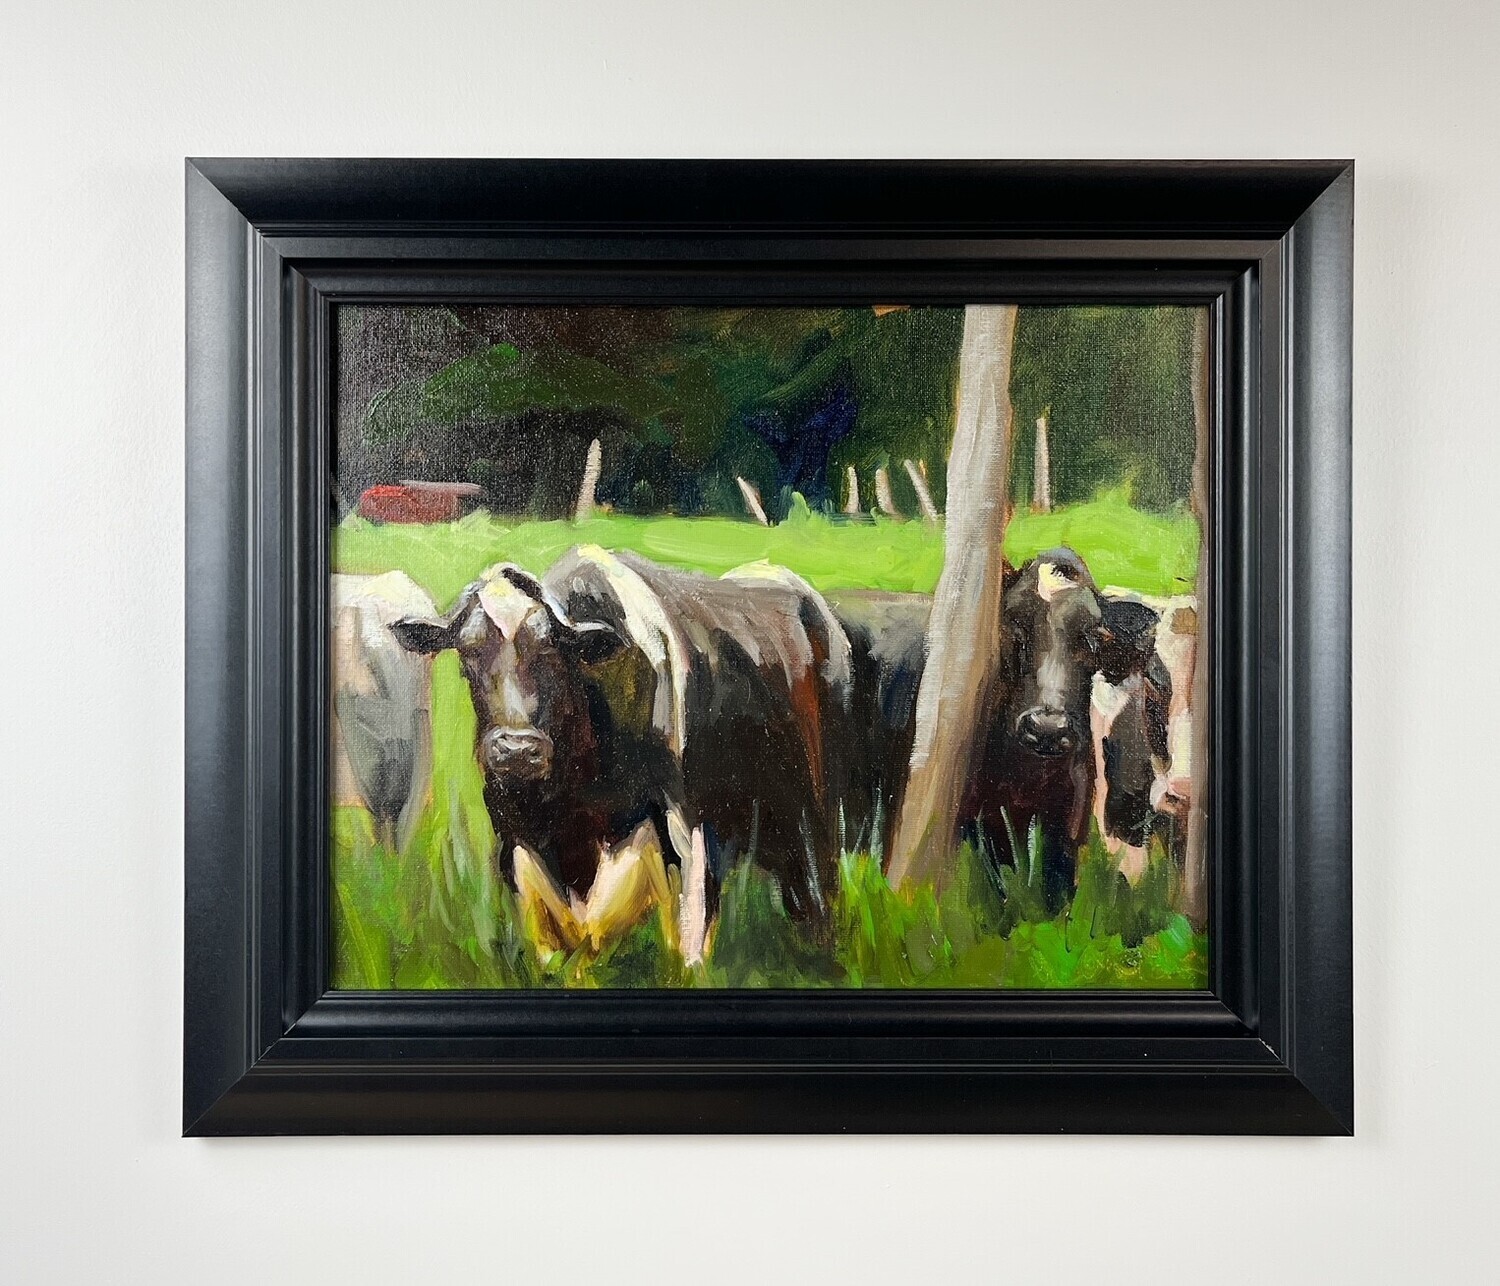 "Curious in the Field" 11x14" Oil on Panel Framed 15x18"